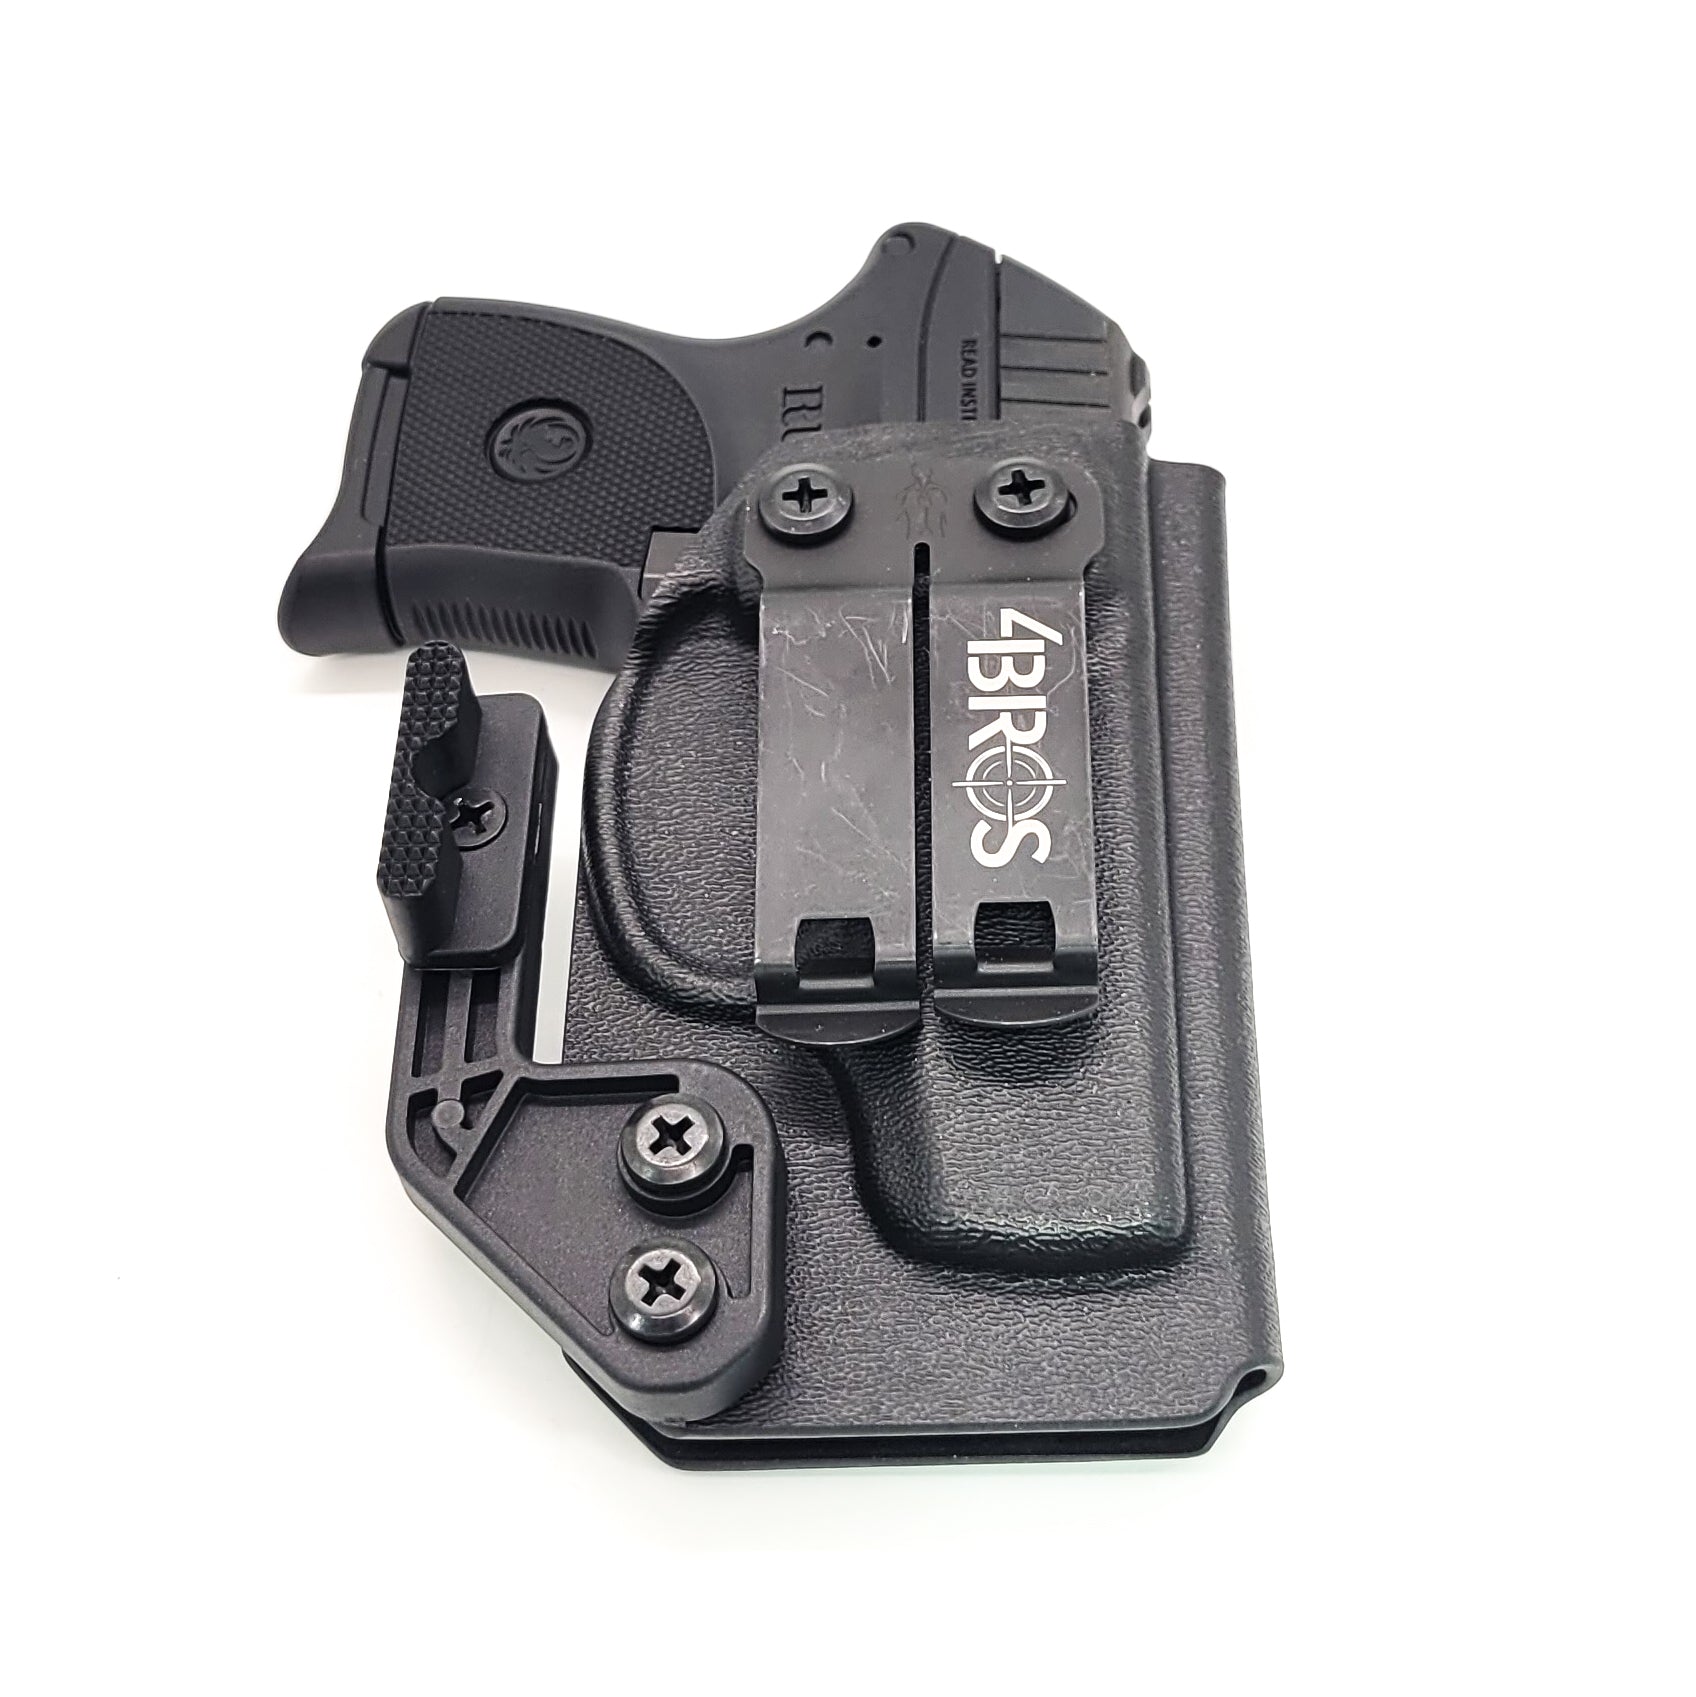 For the best Inside Waistband AIWB IWB Pocket Kydex Holster designed to fit the Ruger LCP 380, shop 4BROS Four Brothers Holsters. The holster is designed with adjustable retention and accommodates the concealment wing to reduce printing and improve comfort. Proudly Made in the USA